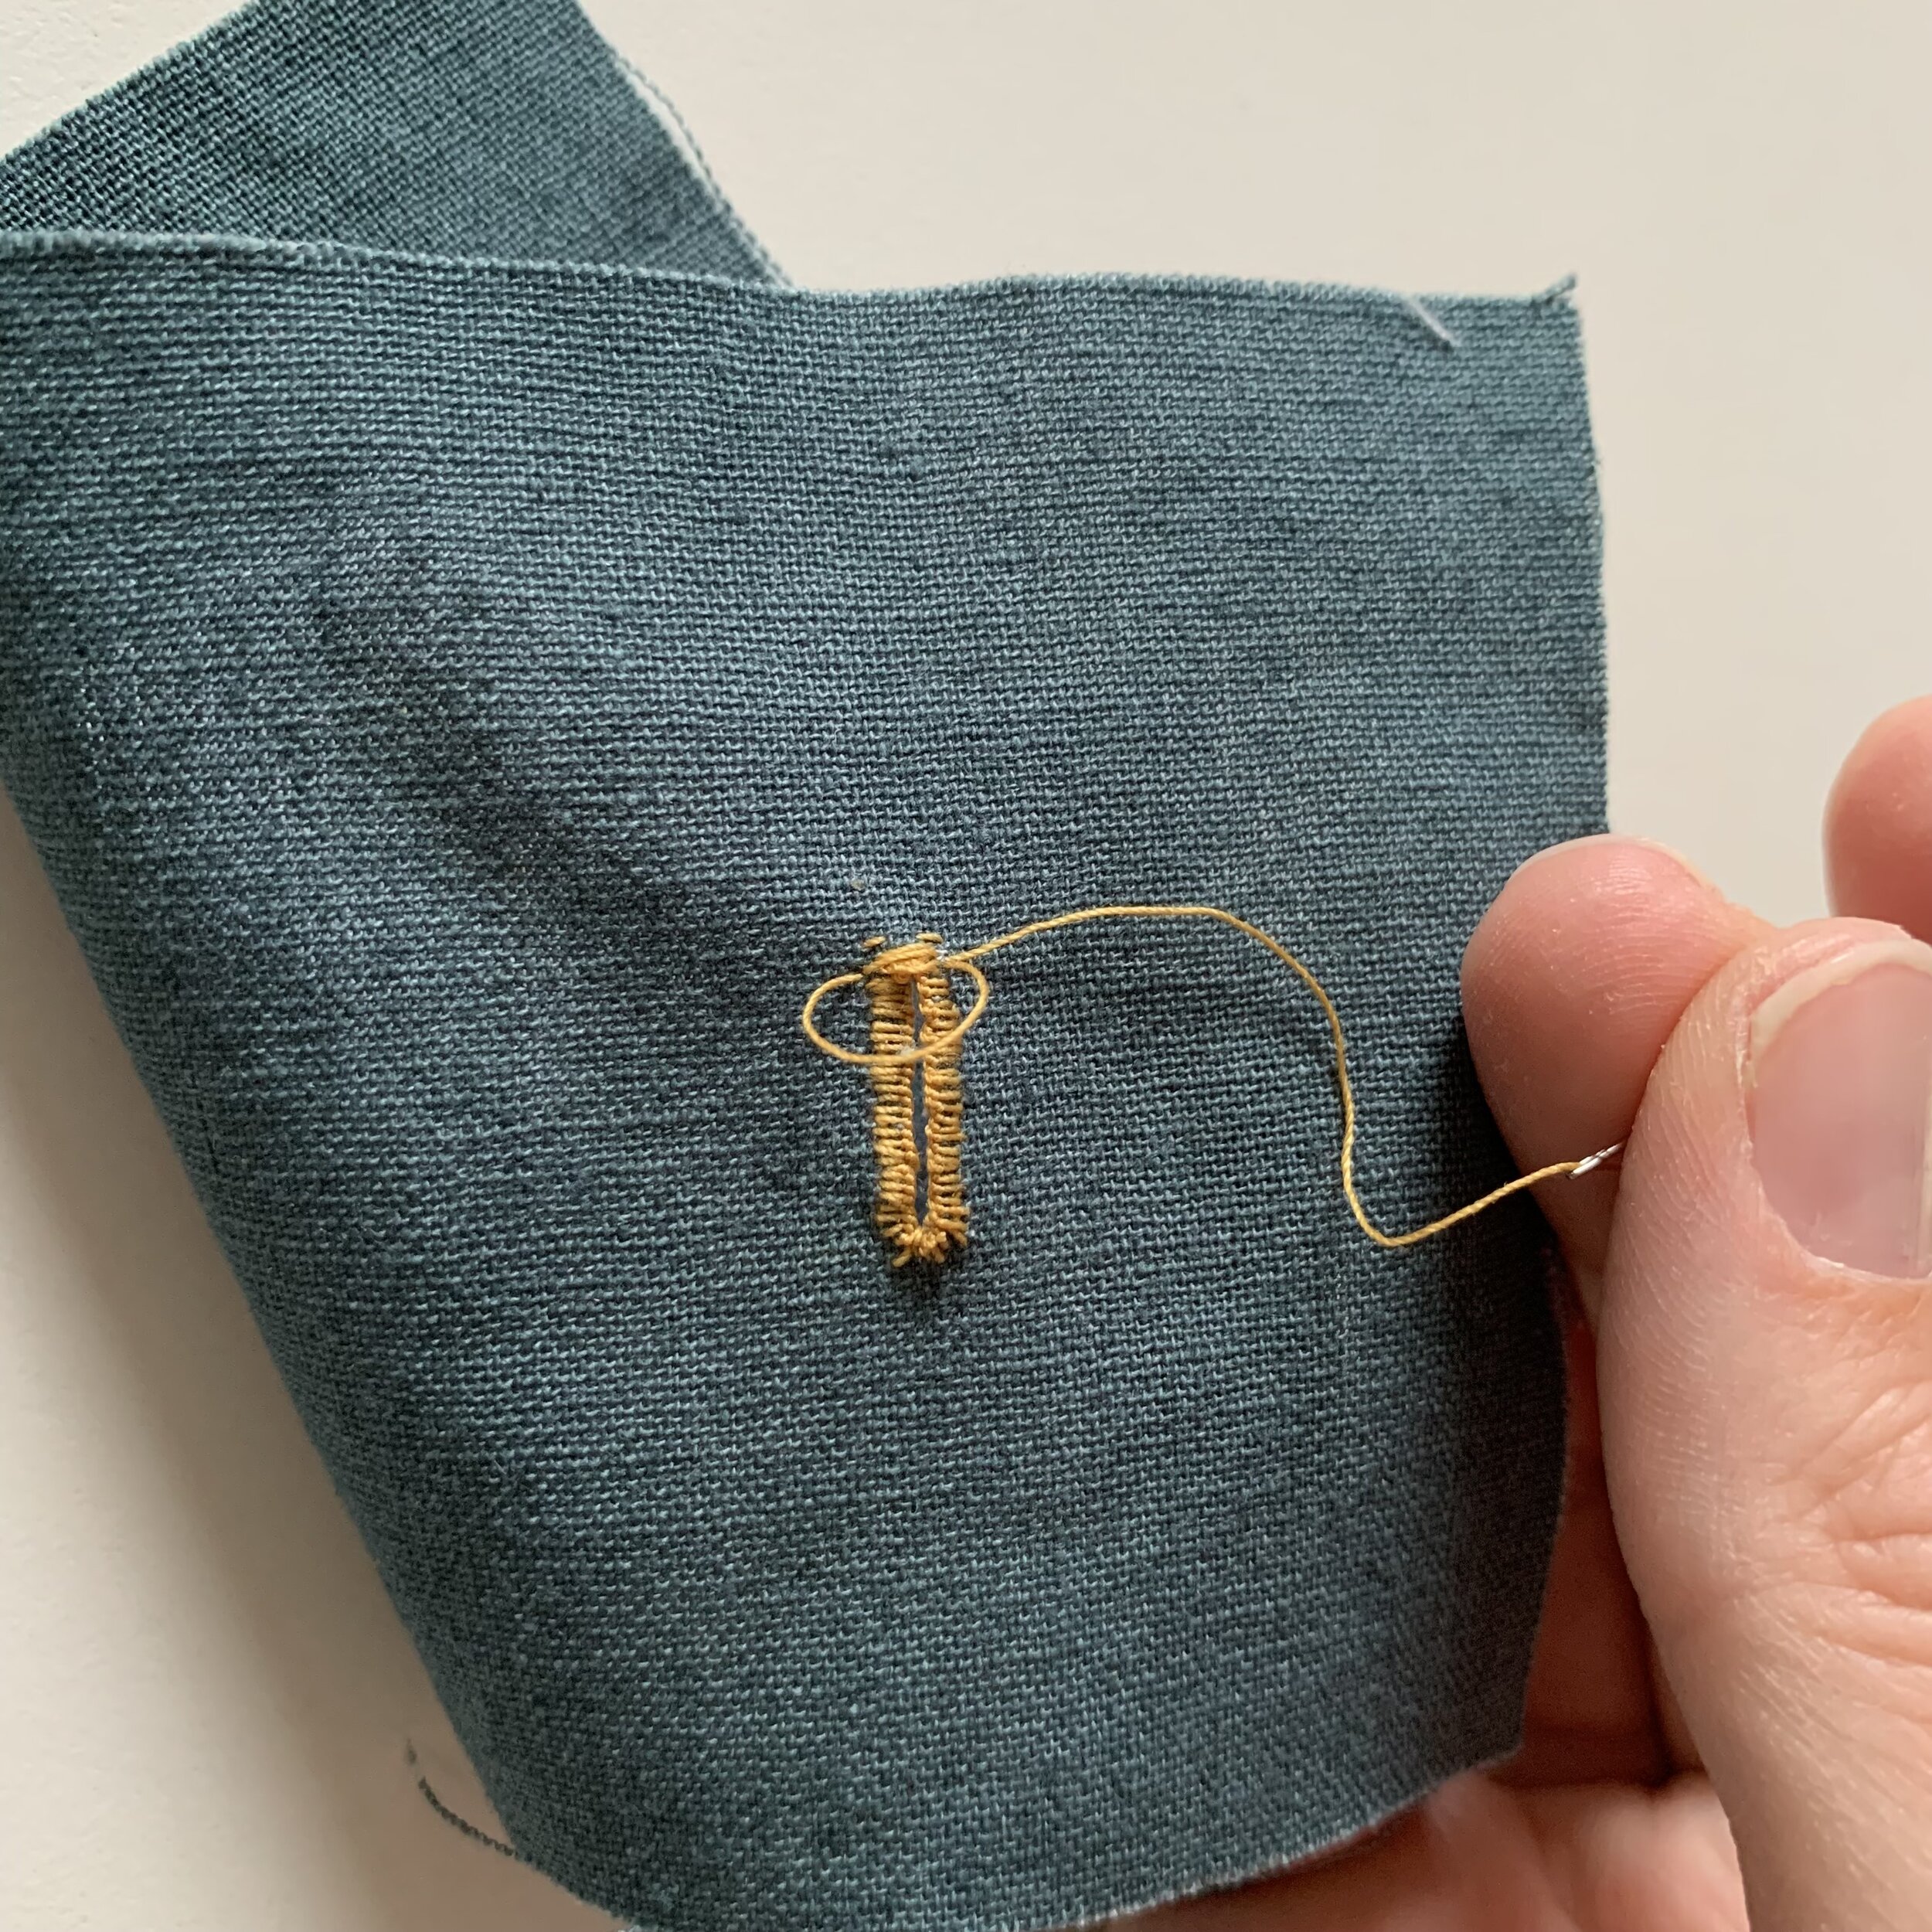 How to Fix a Buttonhole